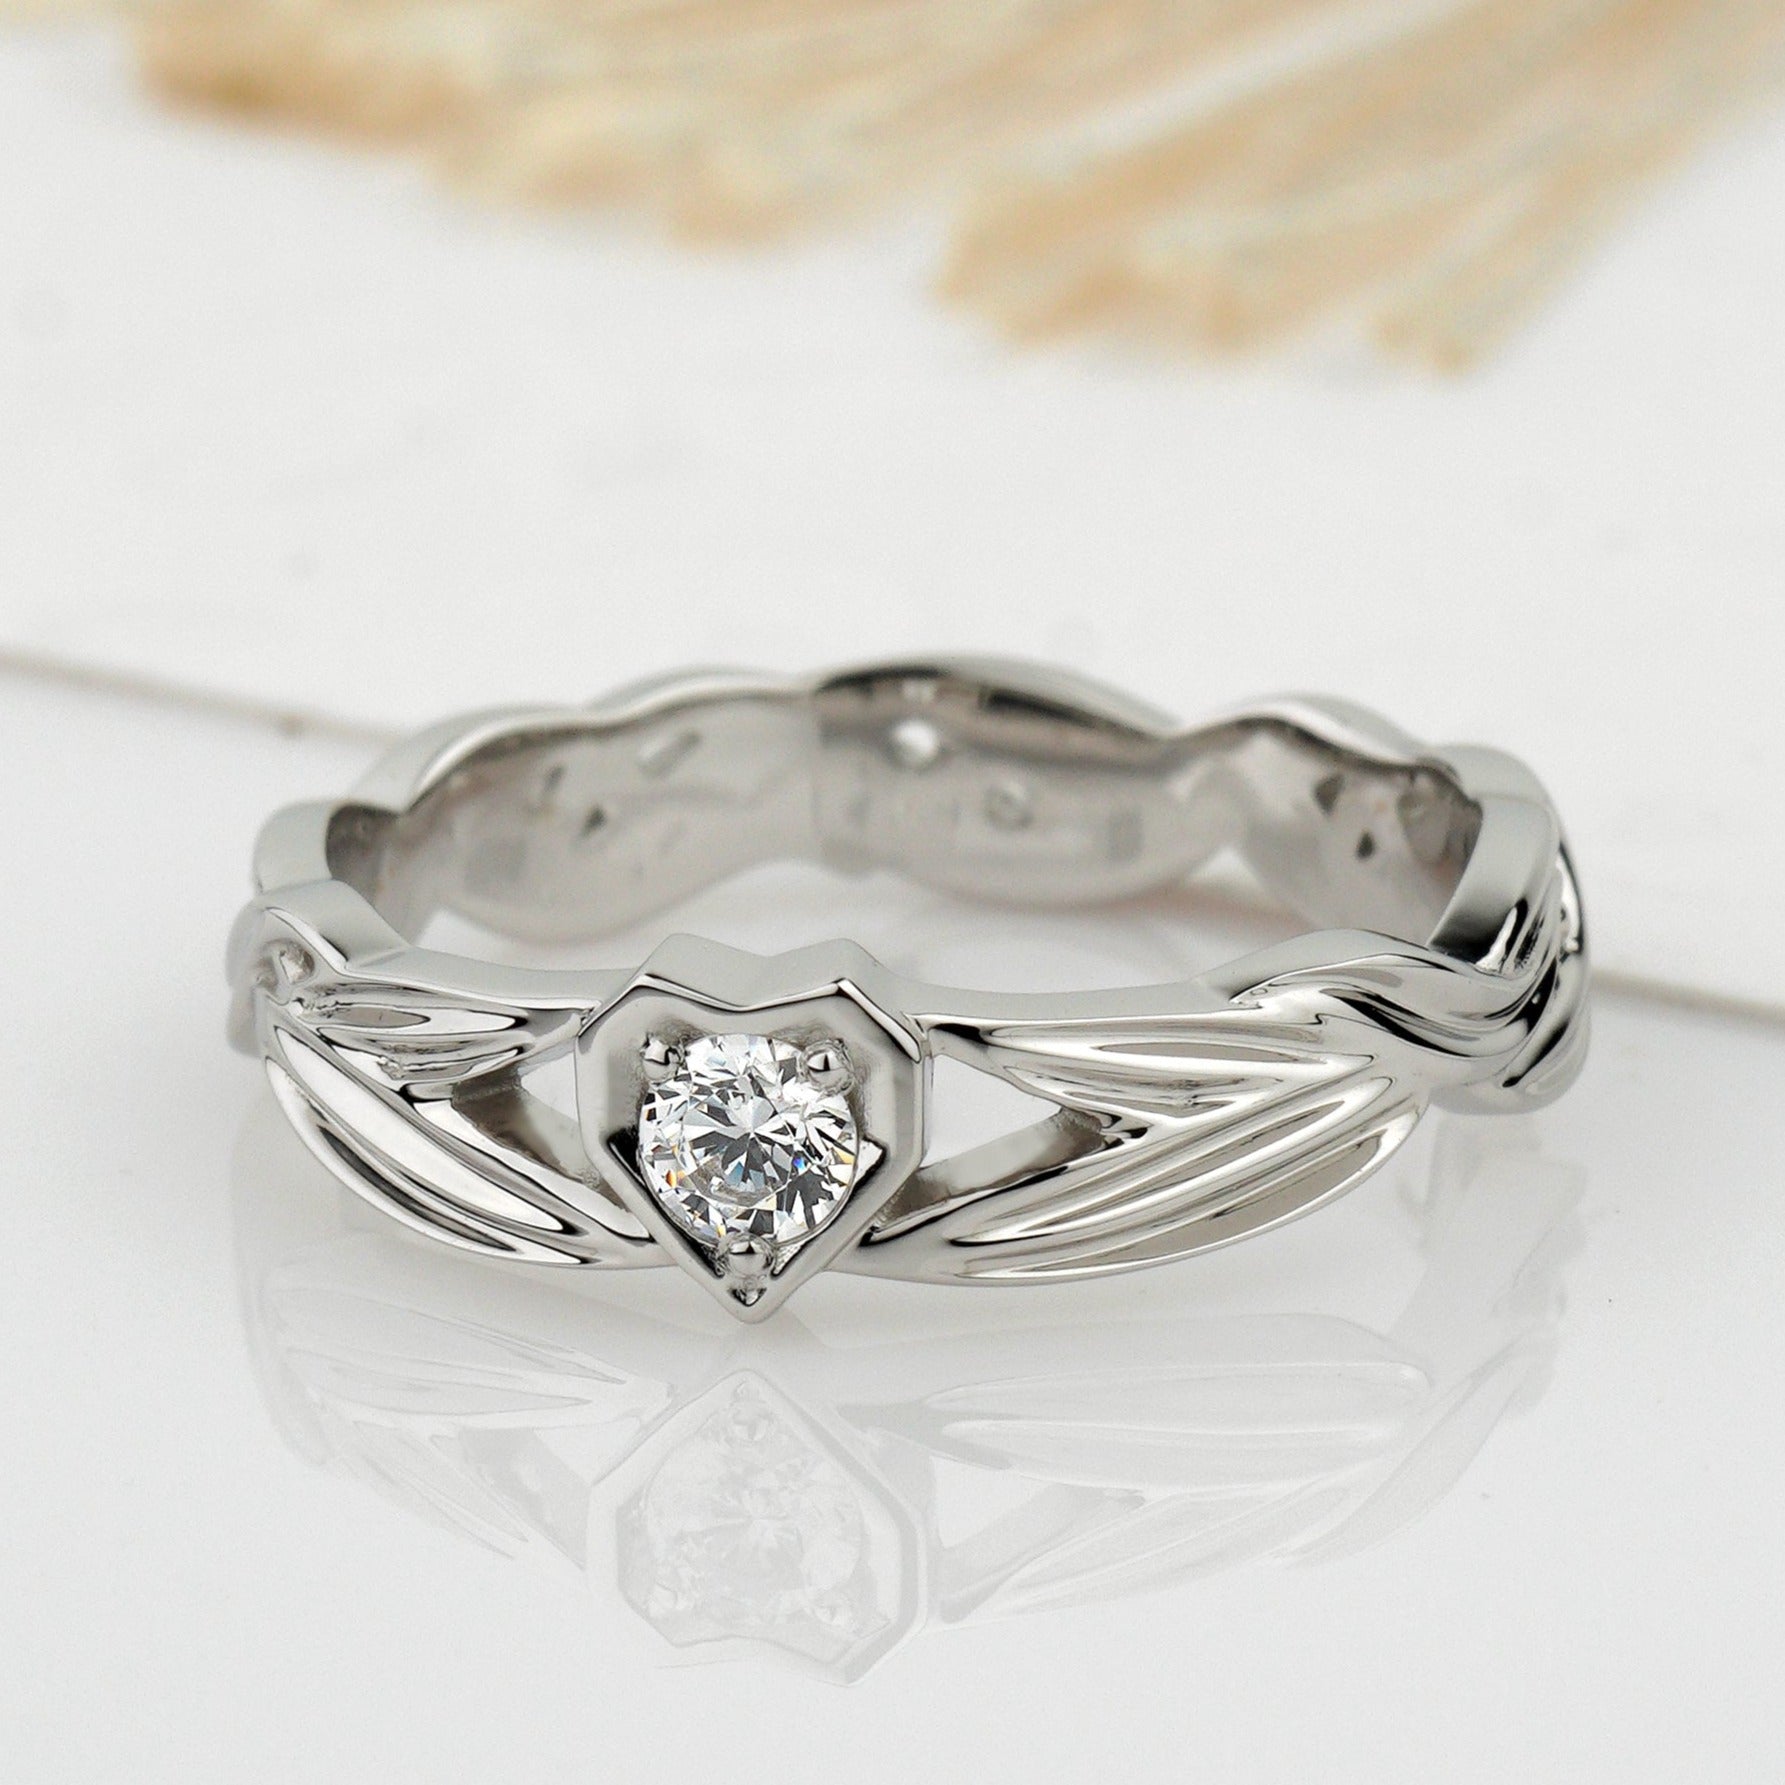 Unique engagement ring with natural diamond. Diamond proposal ring. White gold diamond ring. Diamond engagement ring. Heart engagement ring. Diamond heart ring.